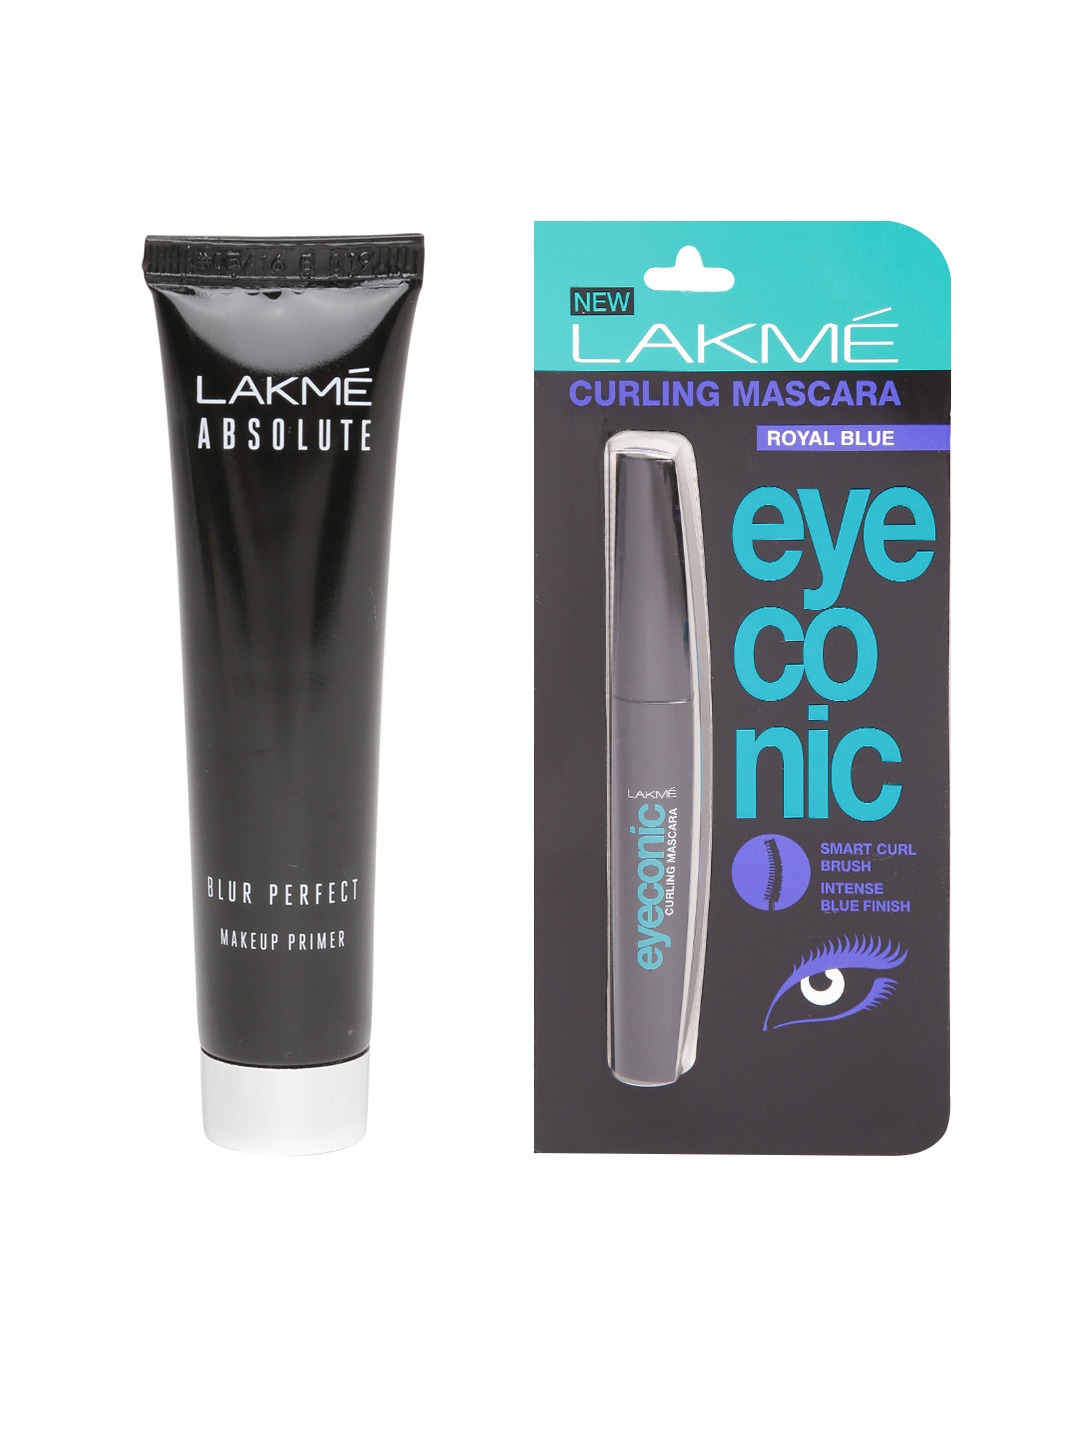 Lakme Absolute Blur Perfect Makeup Primer & Eyeconic Royal Blue Curling Mascara Price in India